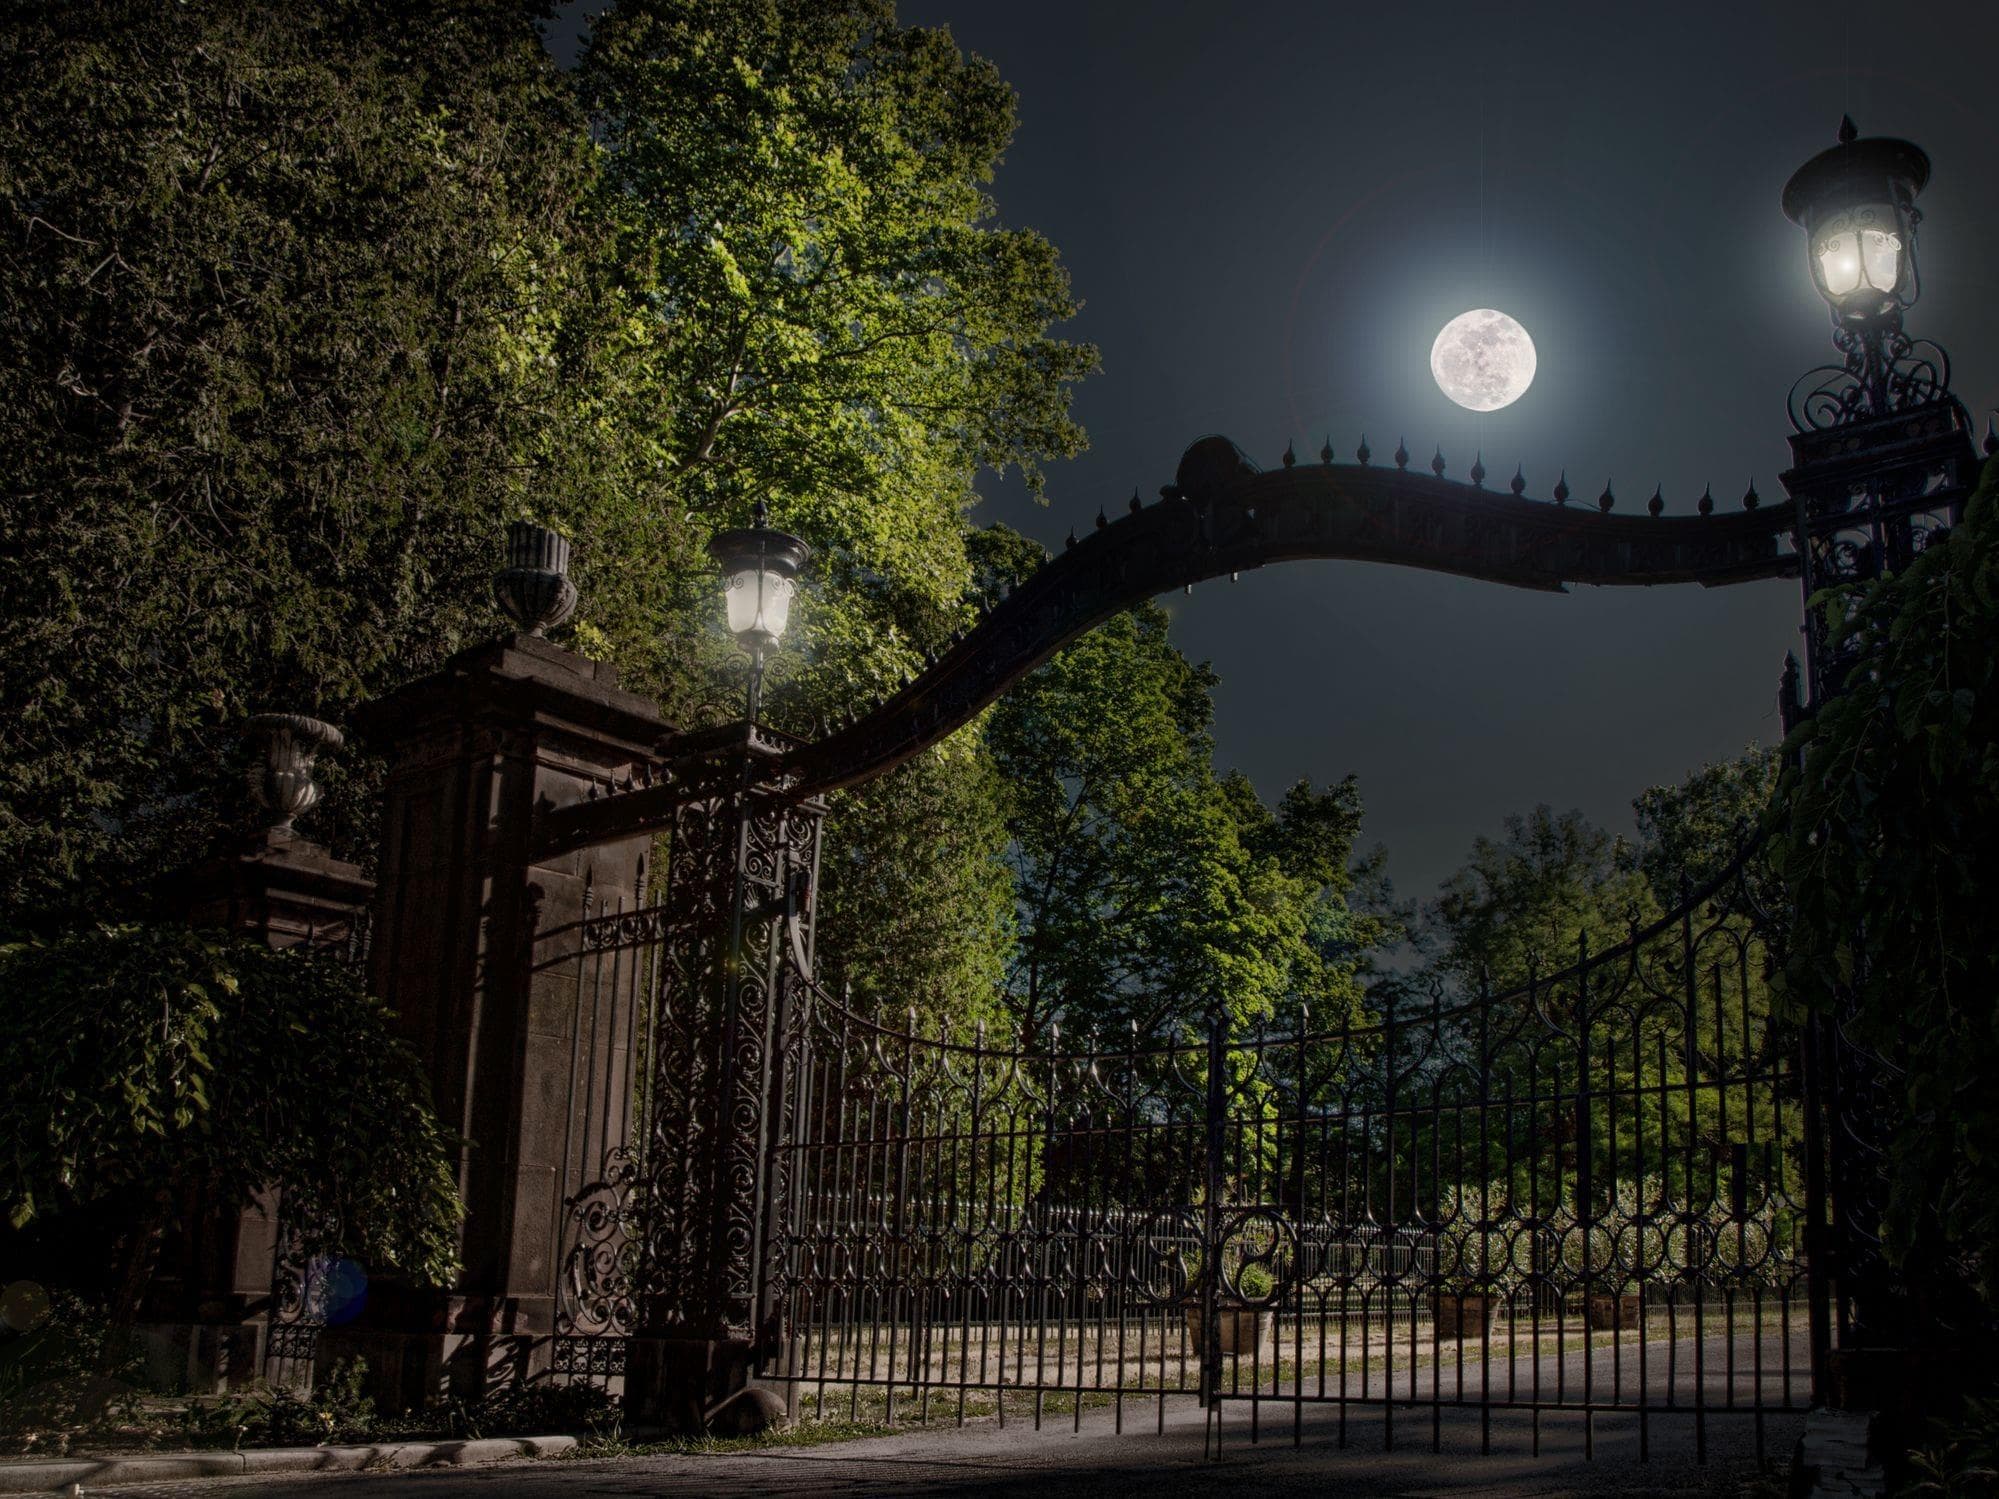 large ornamental gate in the moonlight